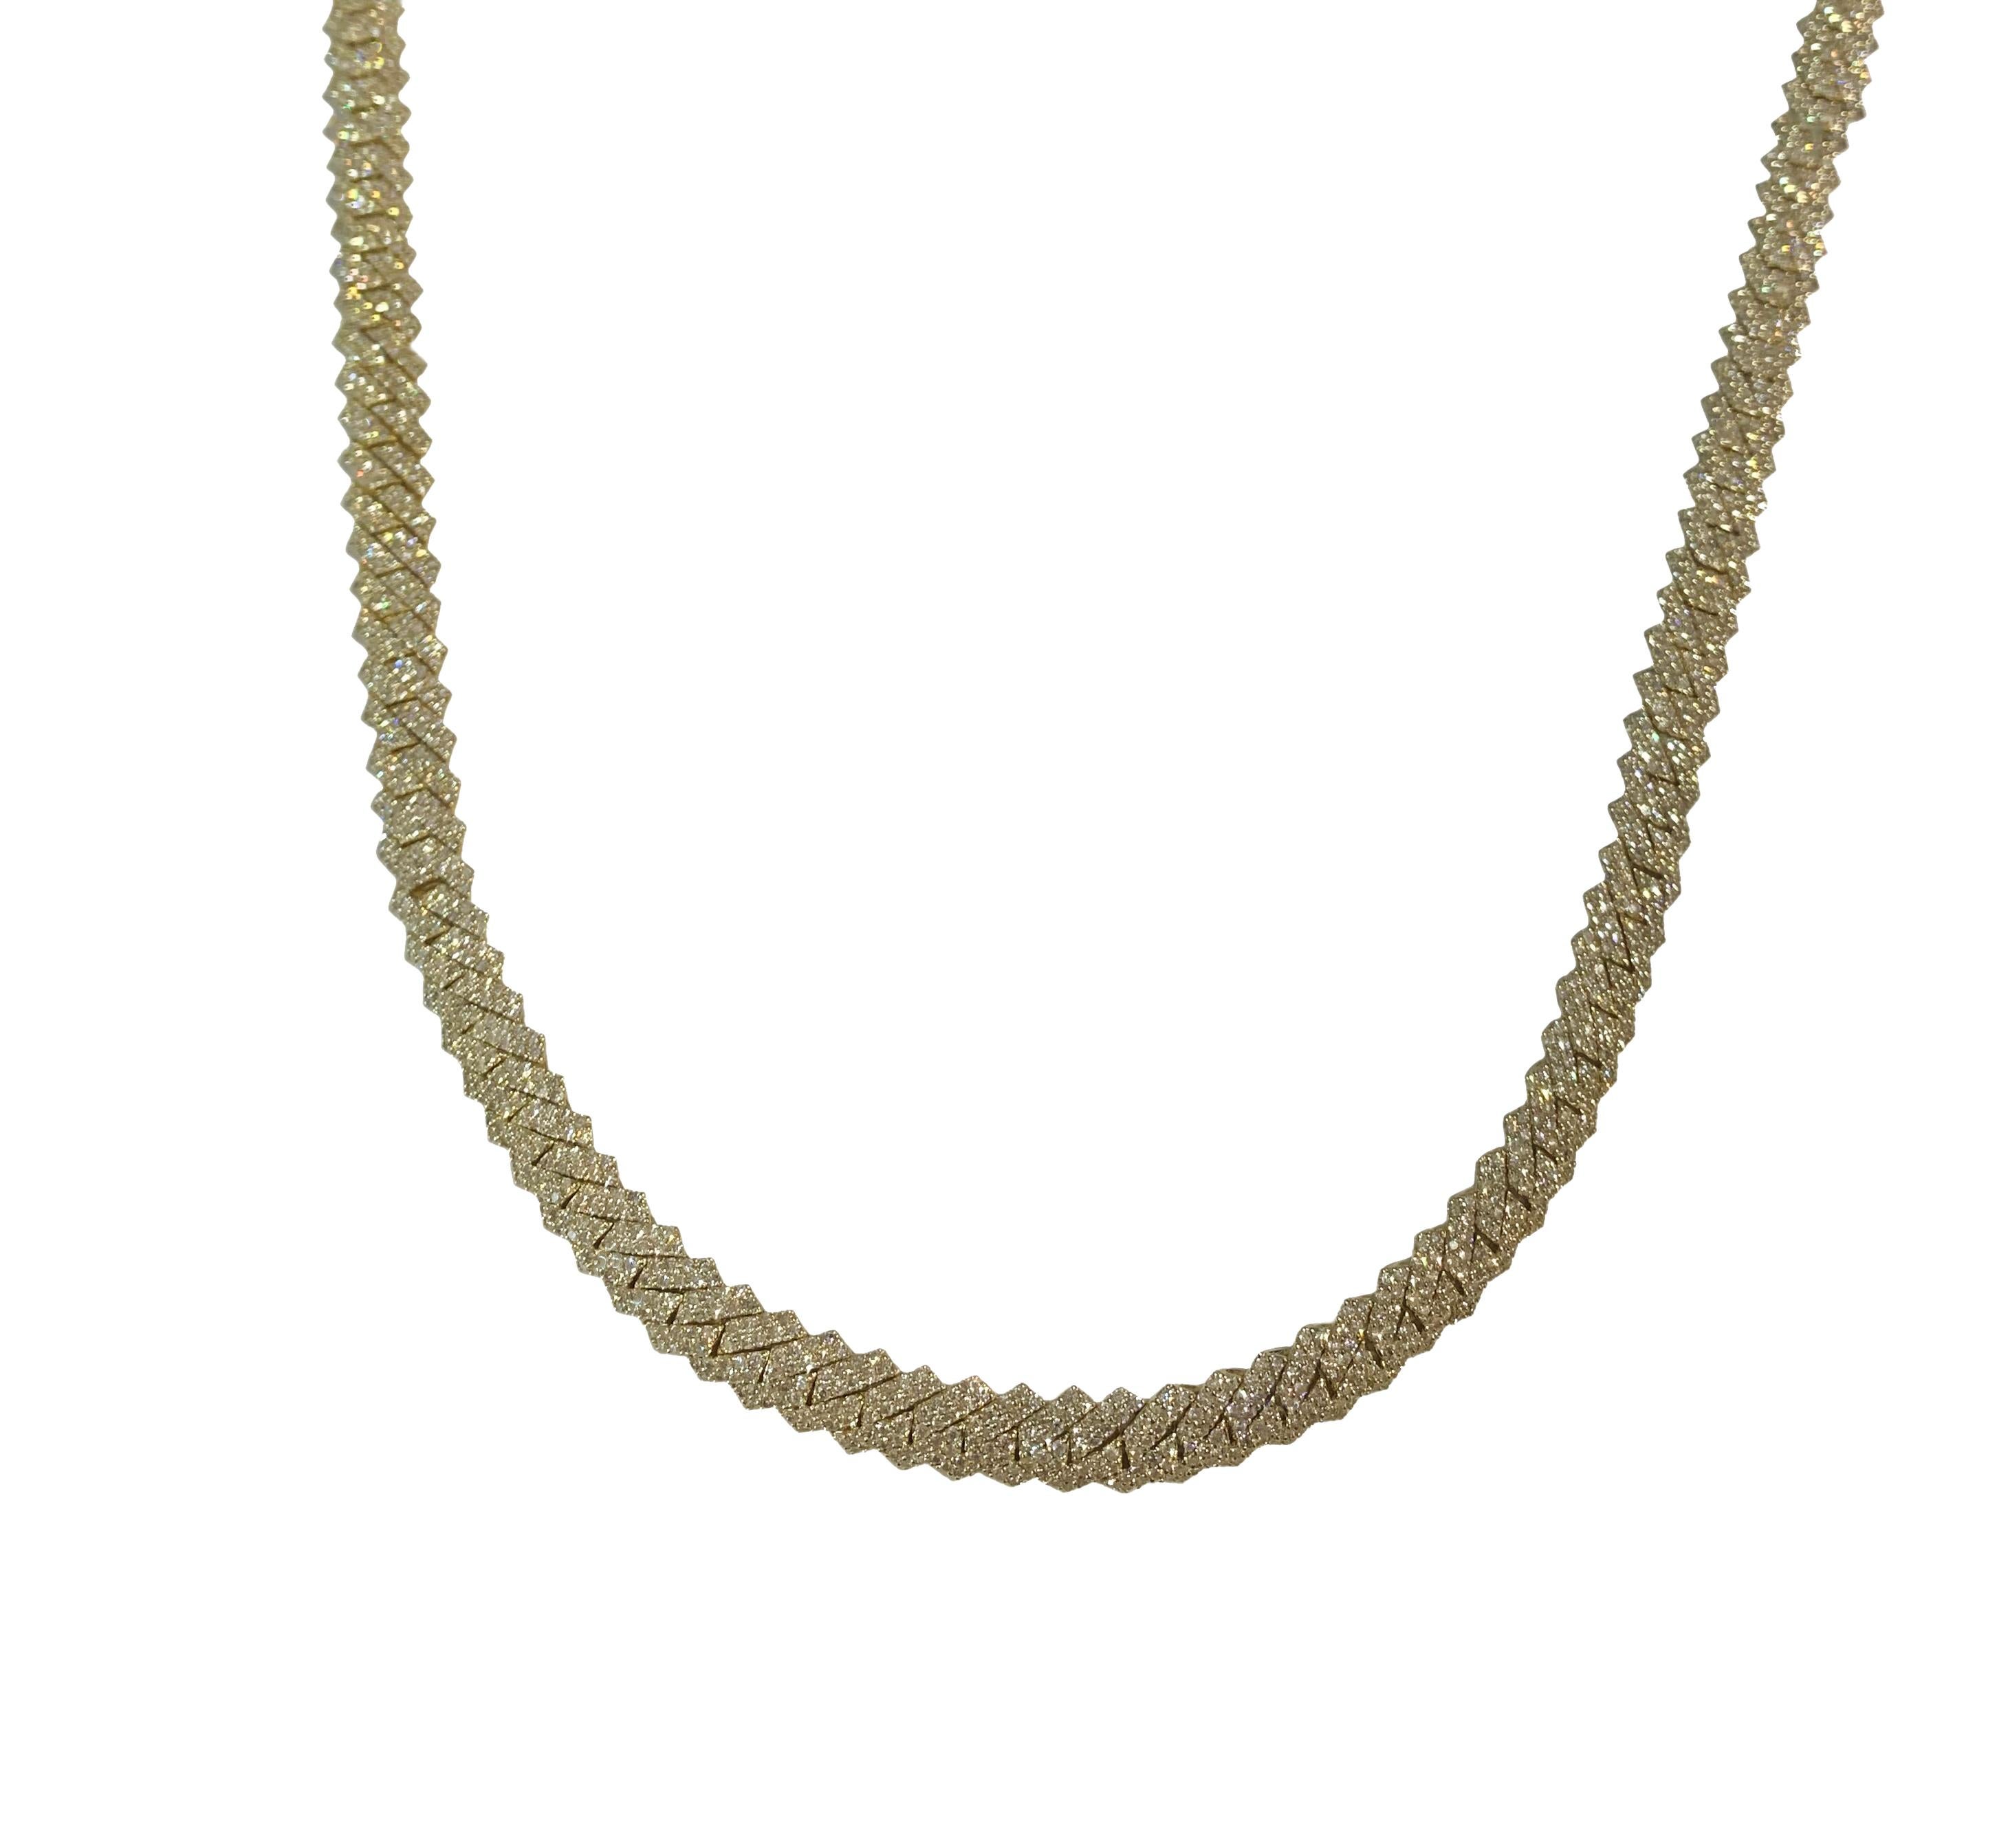 -Custom made

-10k Yellow Gold

-Length: 22”

-Width: 7.8mm

-Weight: 75gr

-Diamond: 23.50 ct, G color, SI clarity